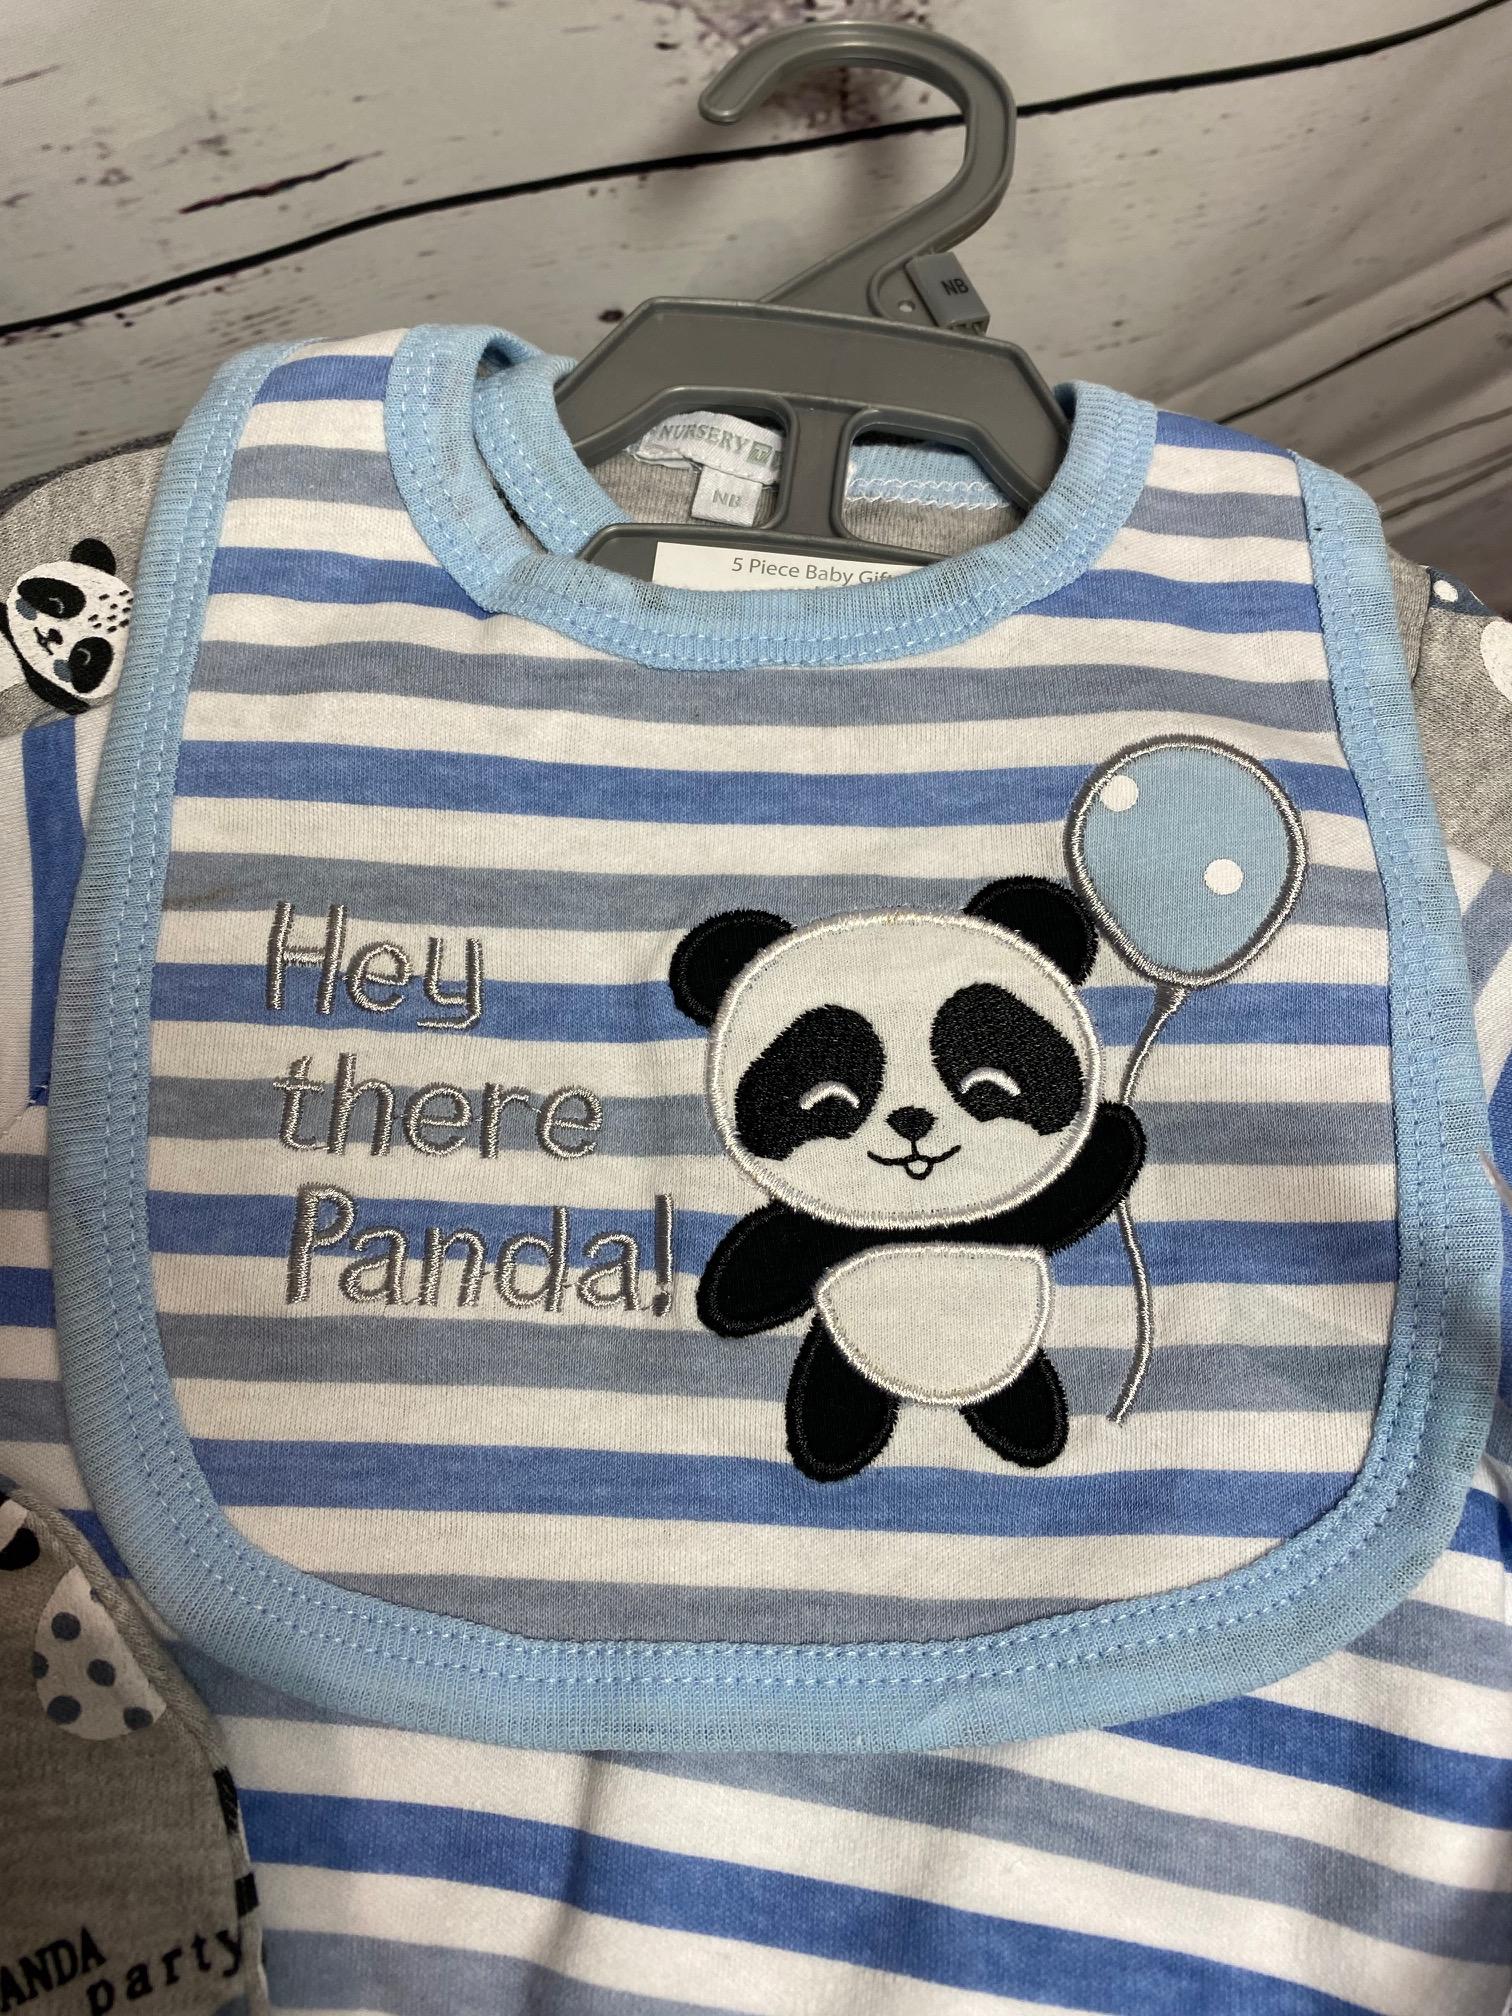 Hey There Panda - 5 Piece new baby gift set